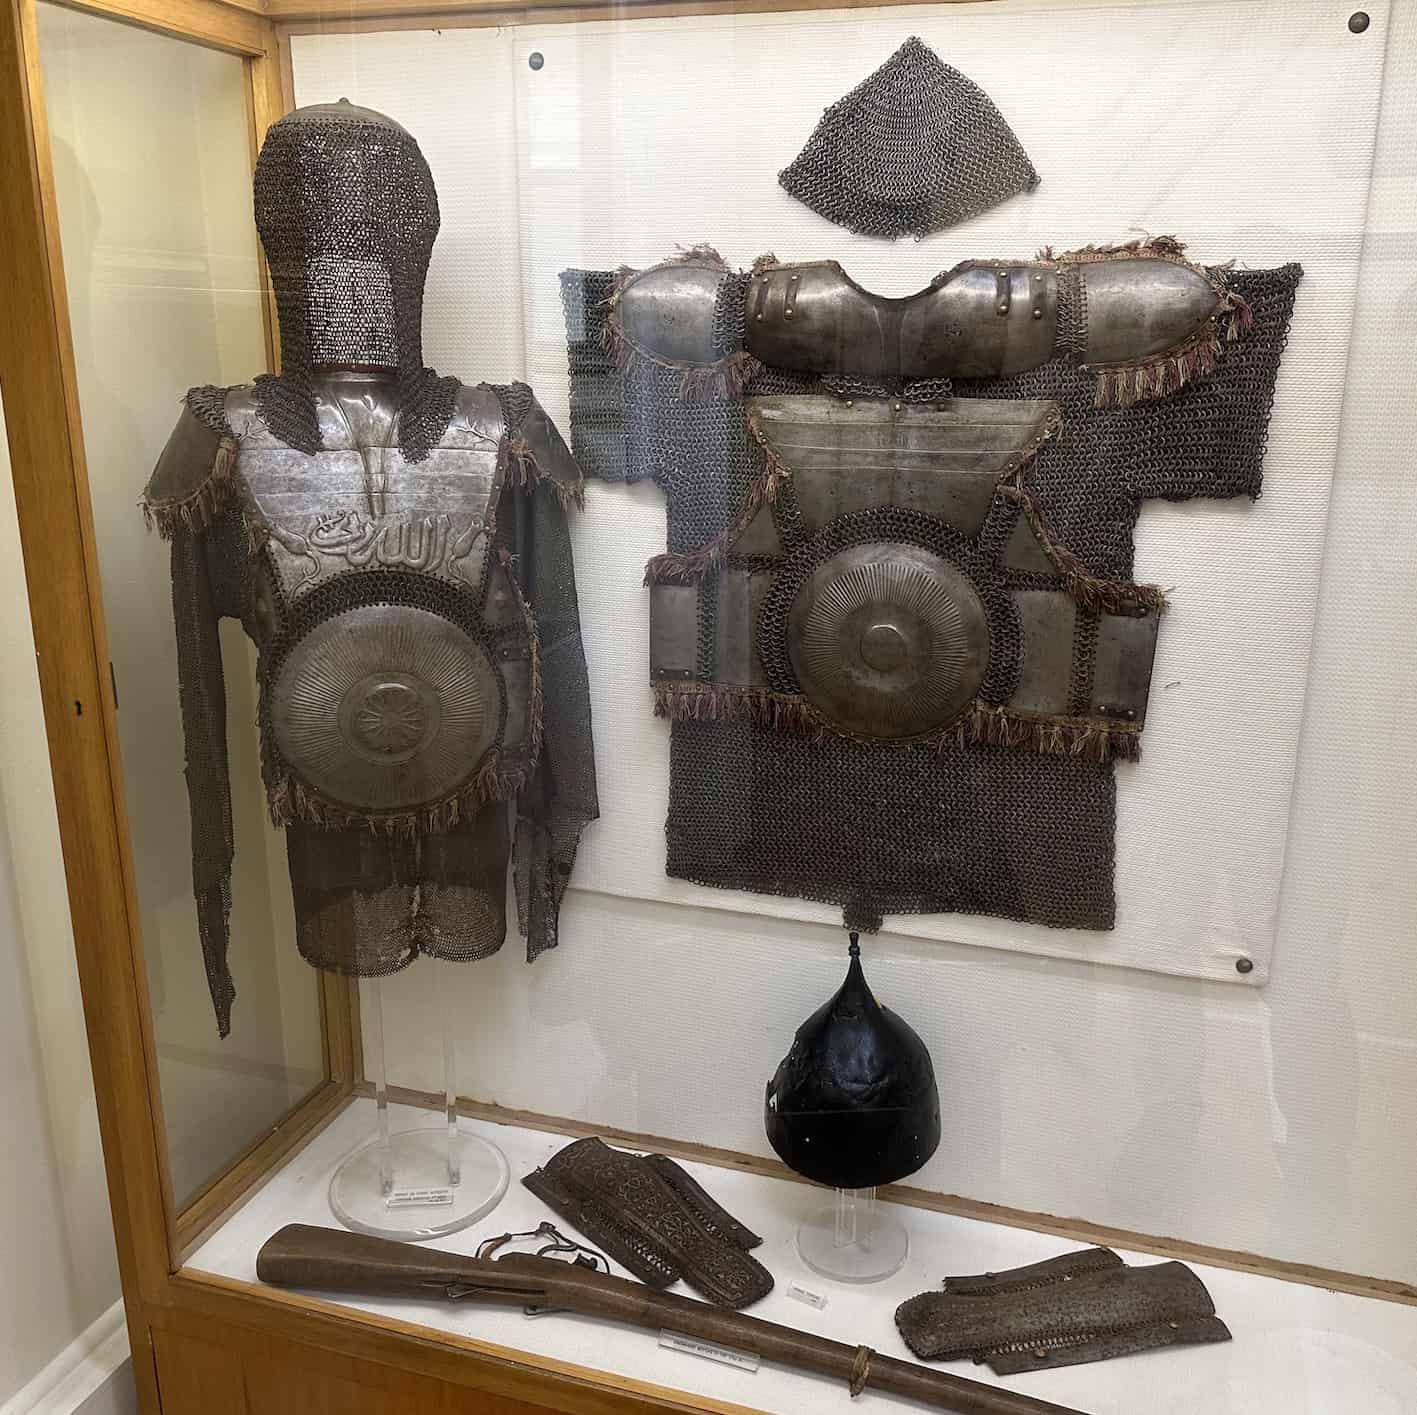 17th century Ottoman armor decorated with verses from the Quran